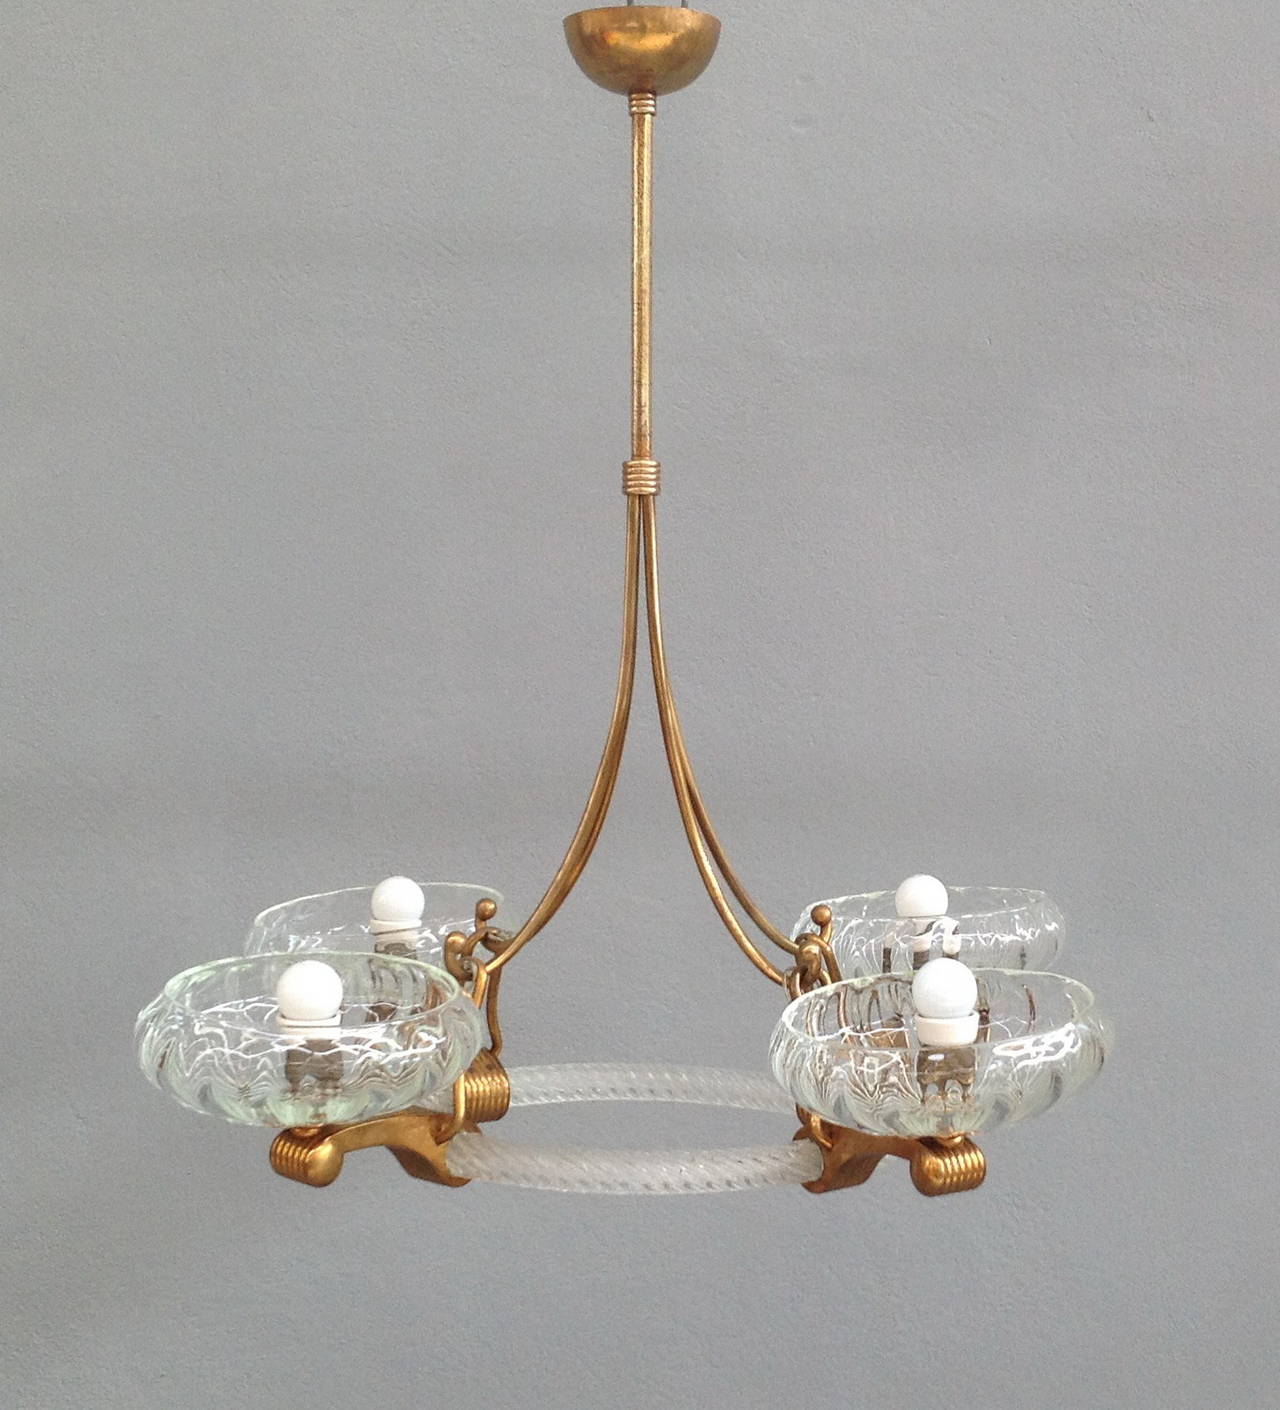 Elegant 4 lights Barovier chandelier with brass and glass structure and 4 brass arms holding hand blown glasses